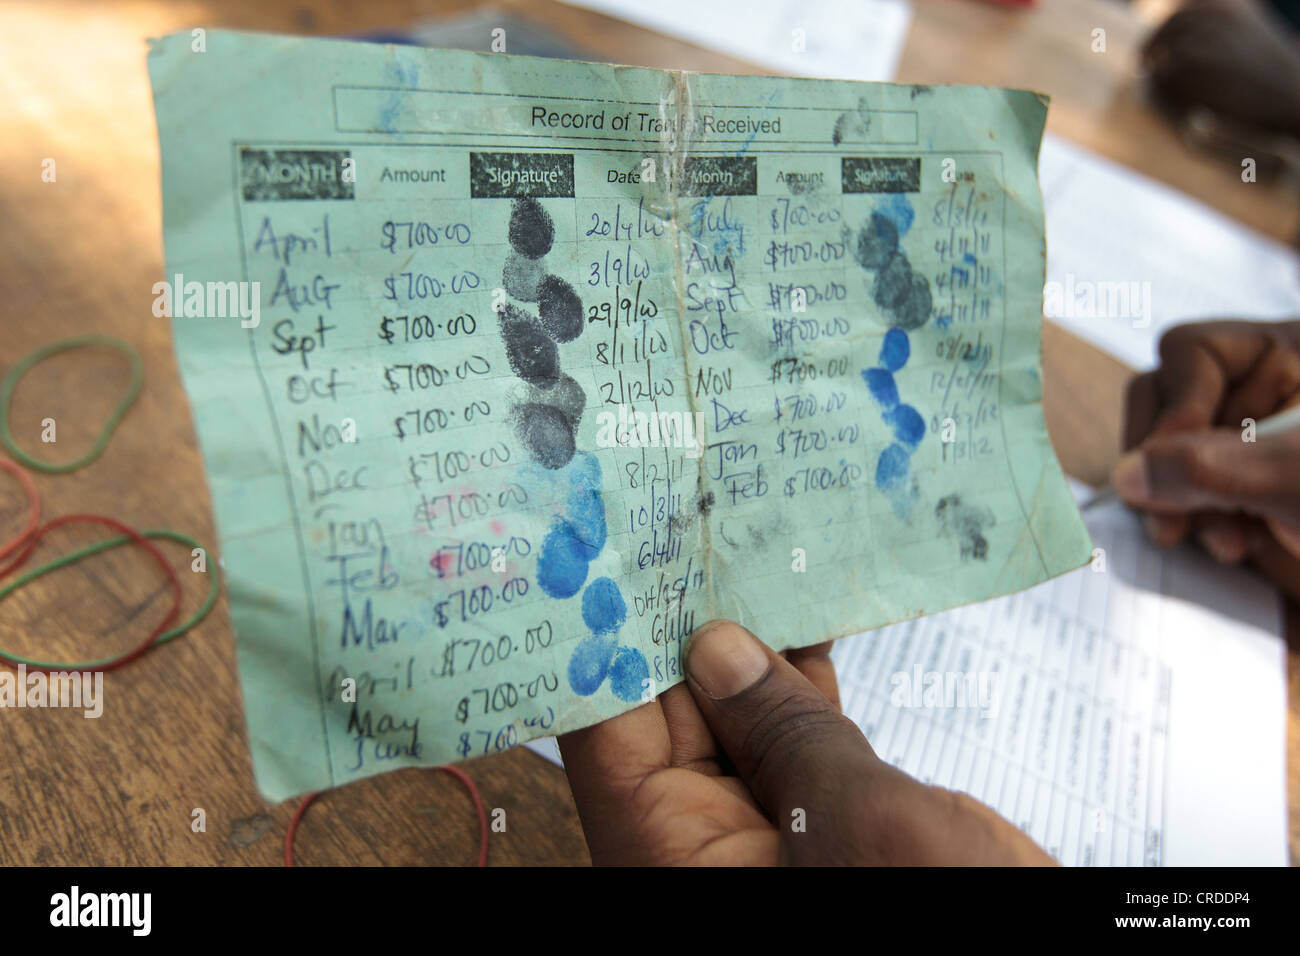 Project staff hold a beneficiary card during a social cash transfer programme distribution in the village of Julijuah, Liberia Stock Photo